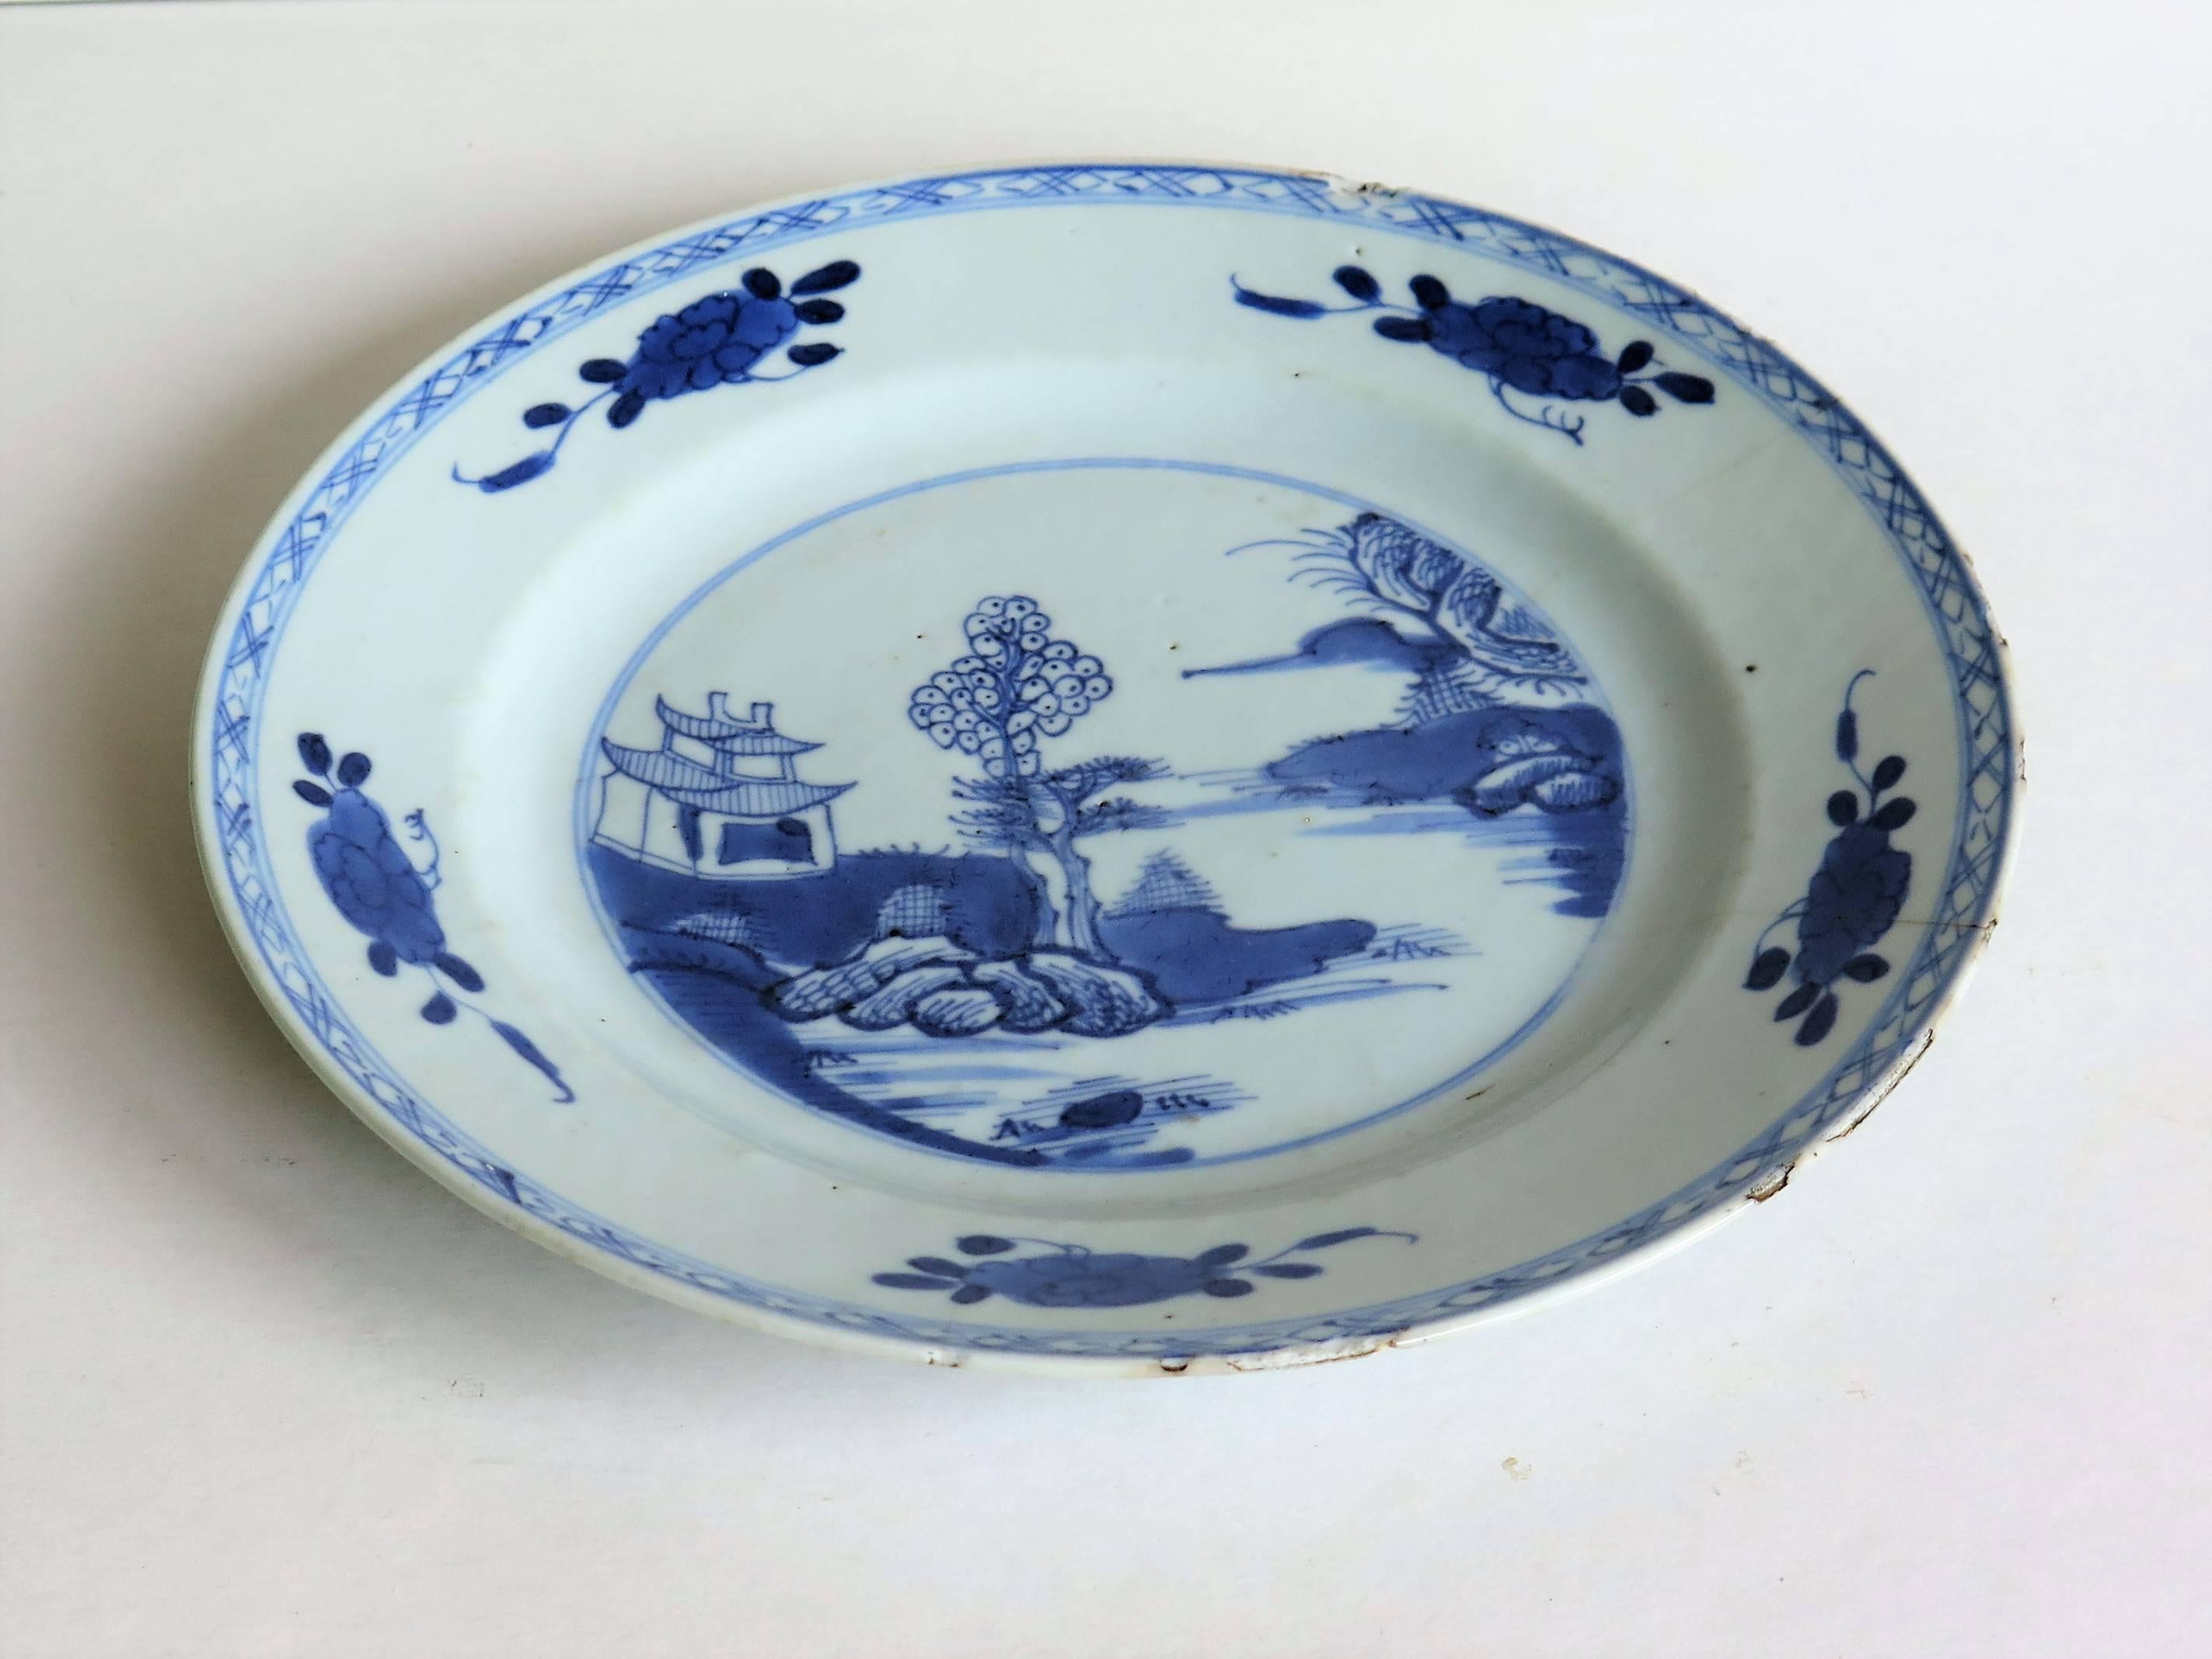 Hand-Painted 18th Century Chinese Plate, Blue and White Porcelain, Pagoda Lake Scene